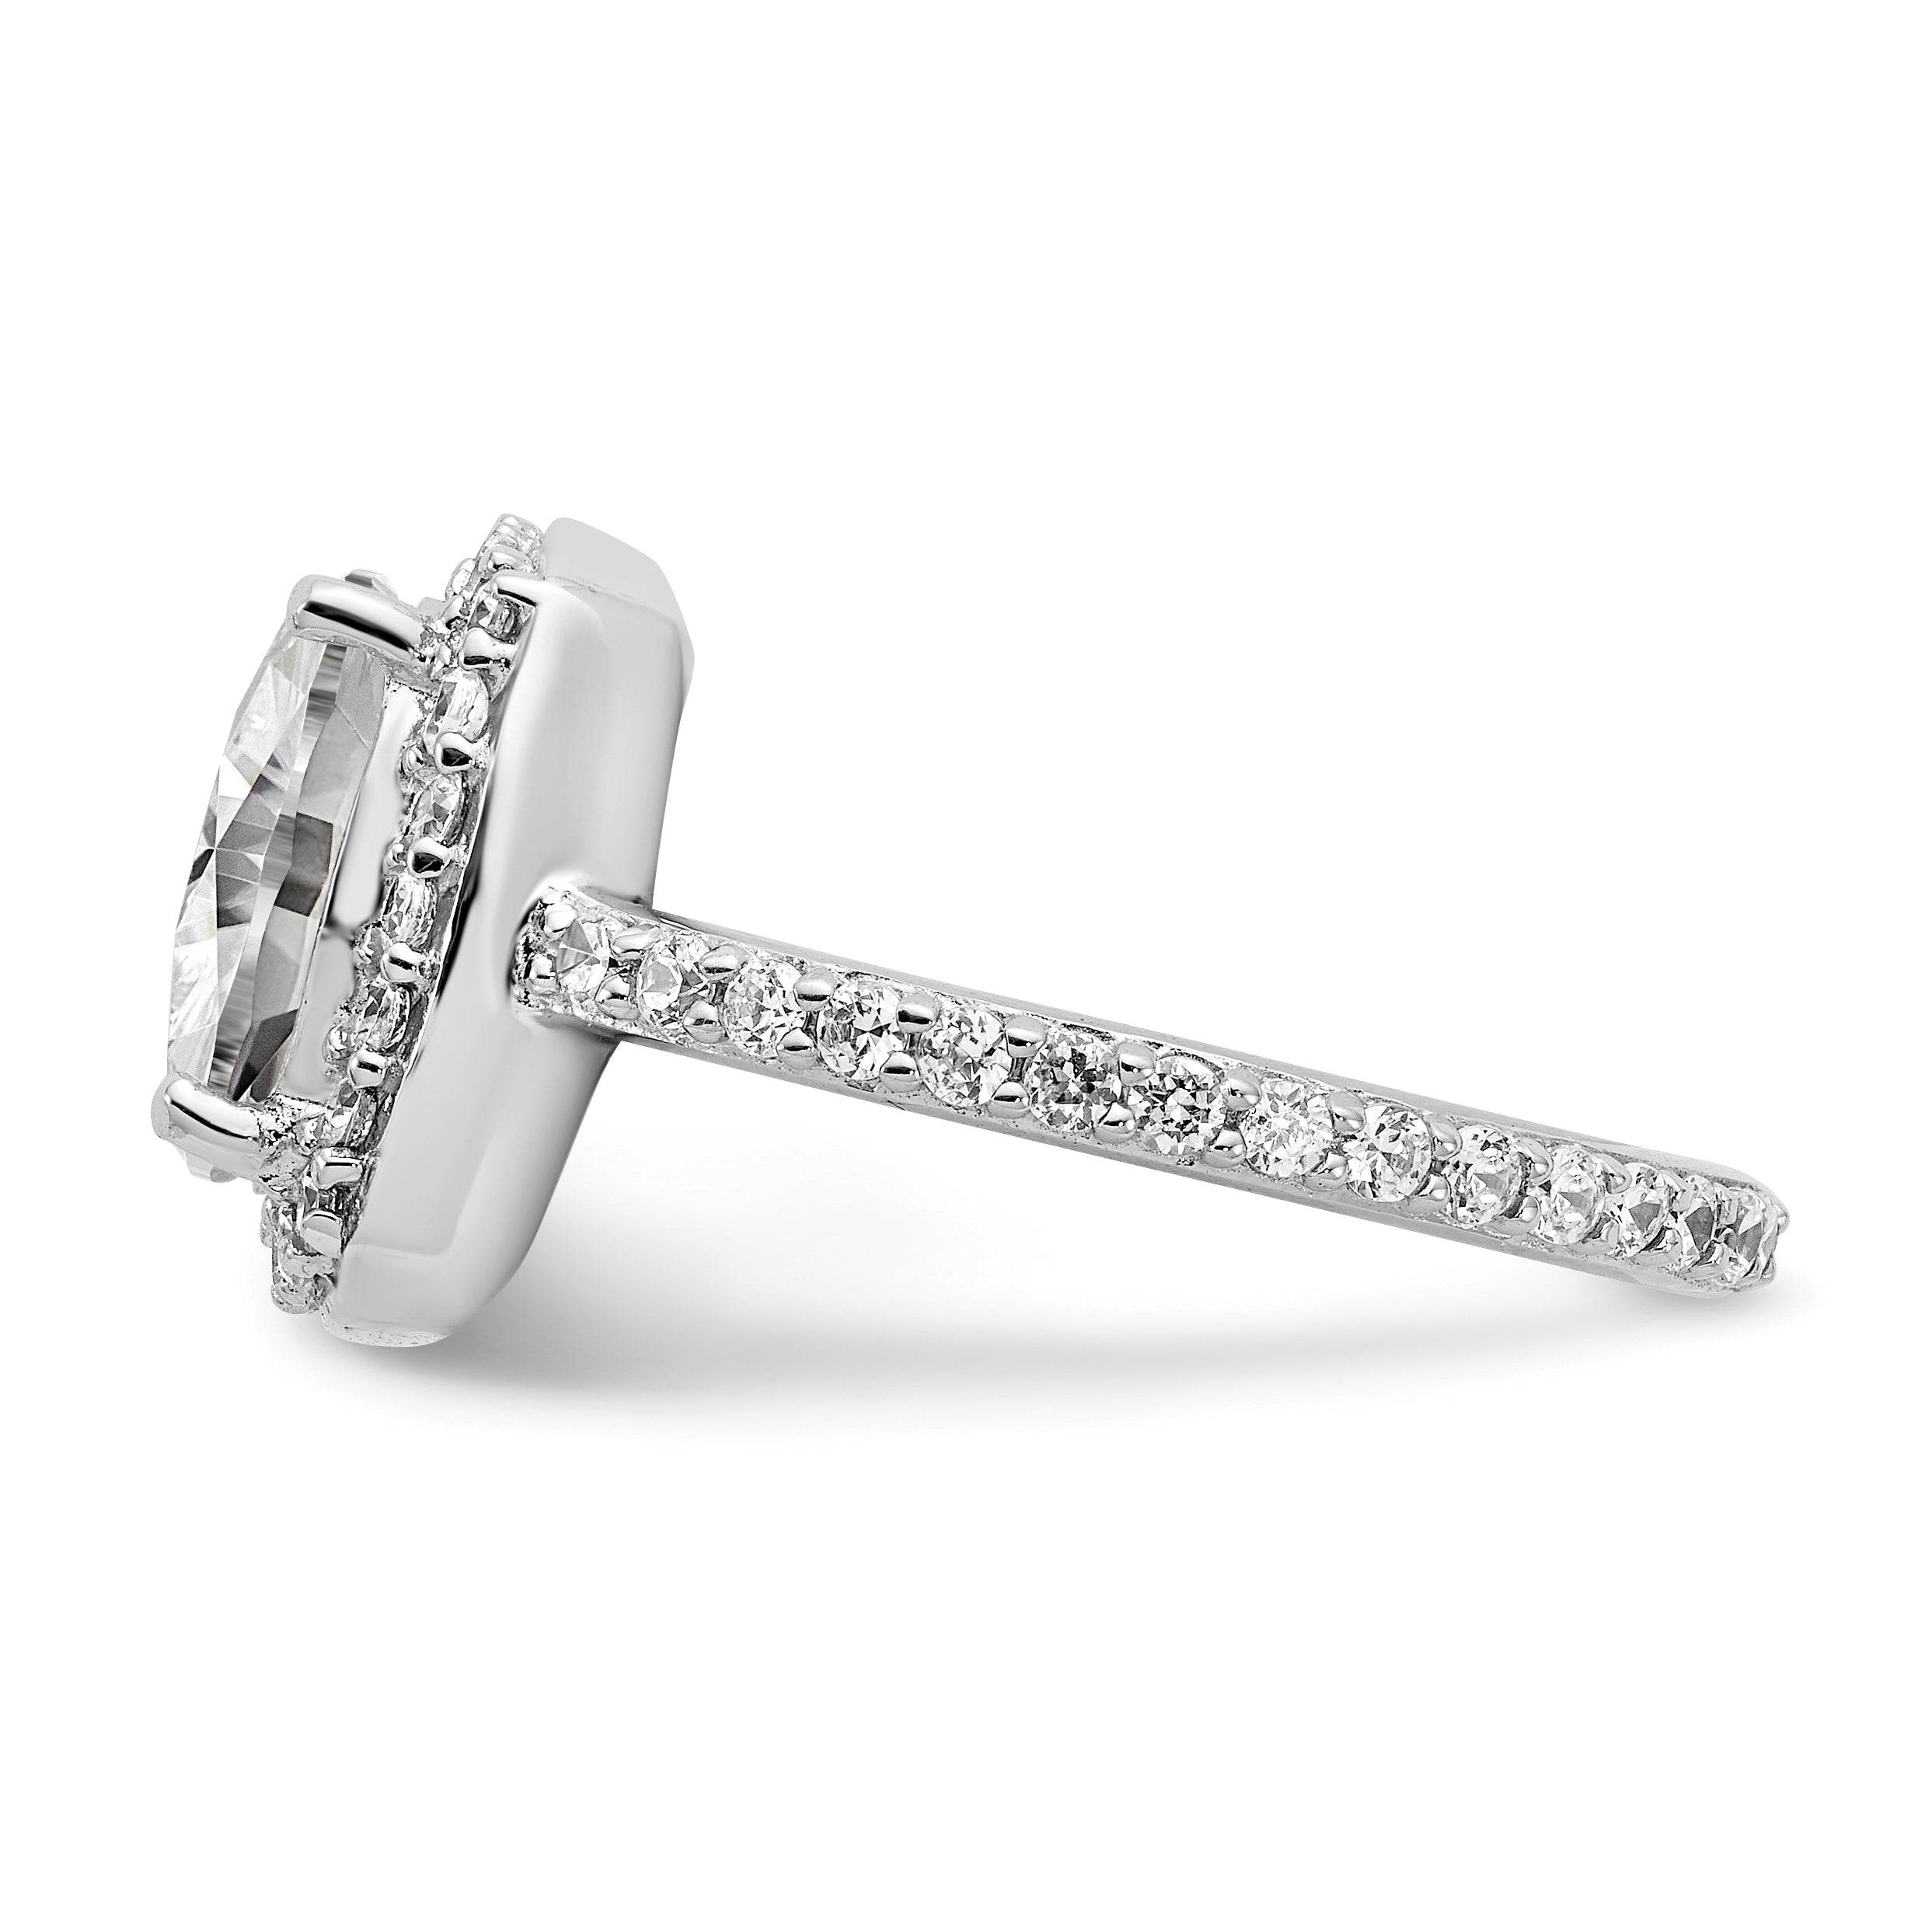 Cheryl M Sterling Silver Rhodium-plated Rose-cut and Brilliant-cut CZ Square Halo Ring